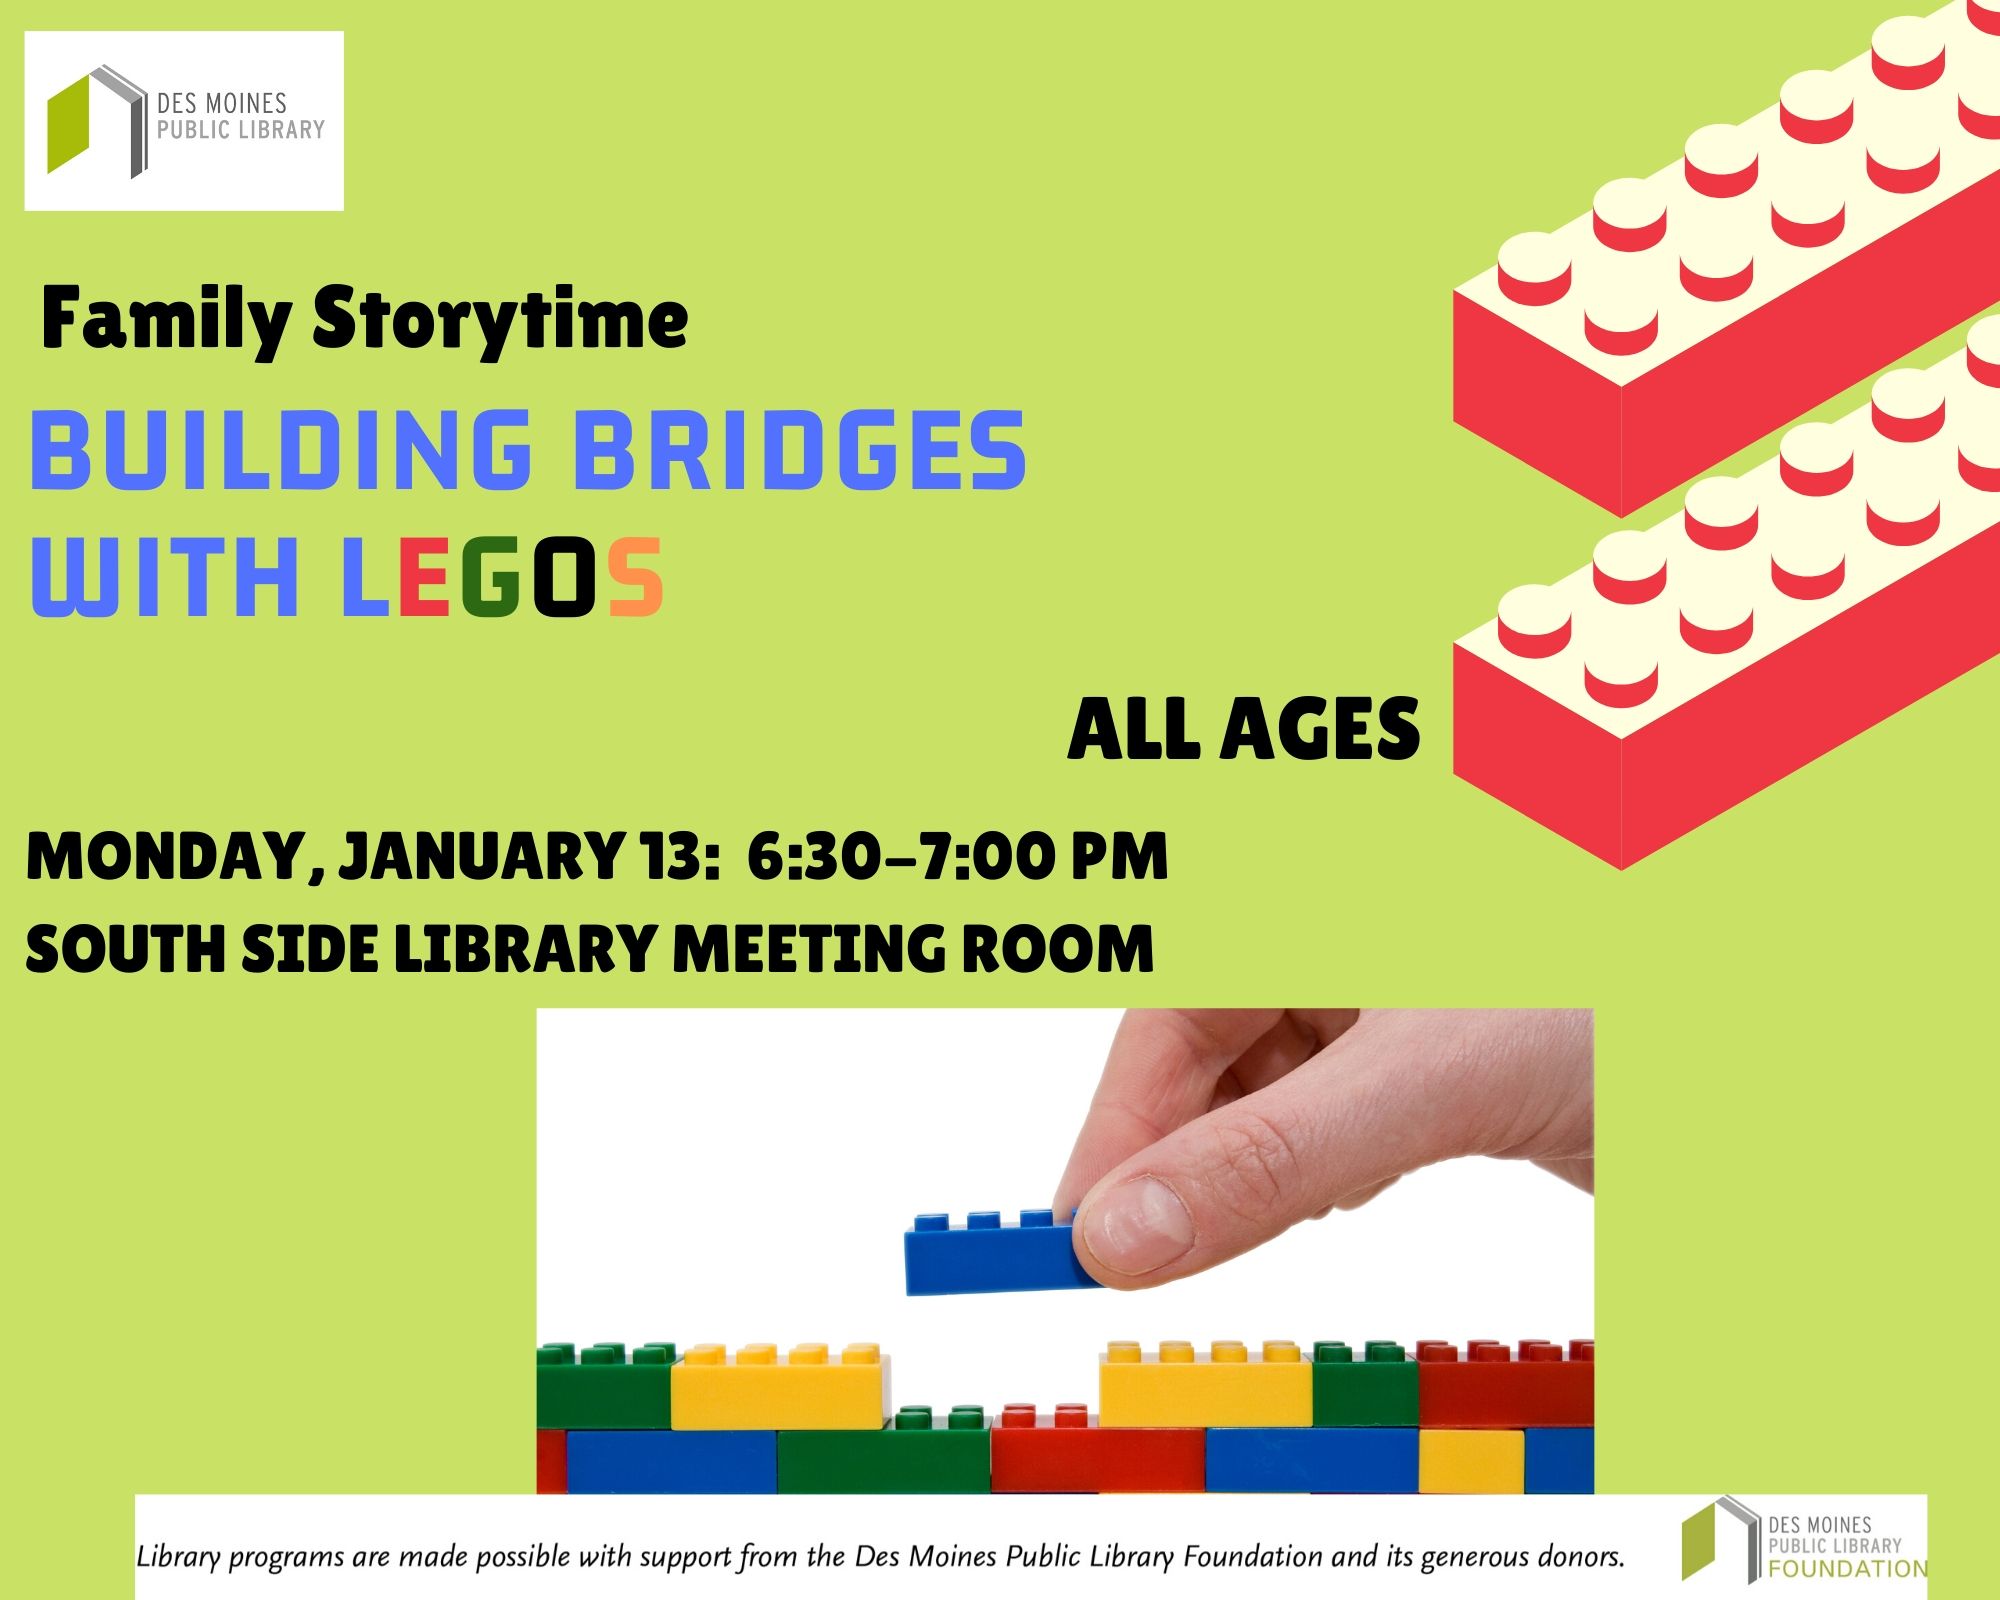 Family Storytime: Building Bridges with LEGOS